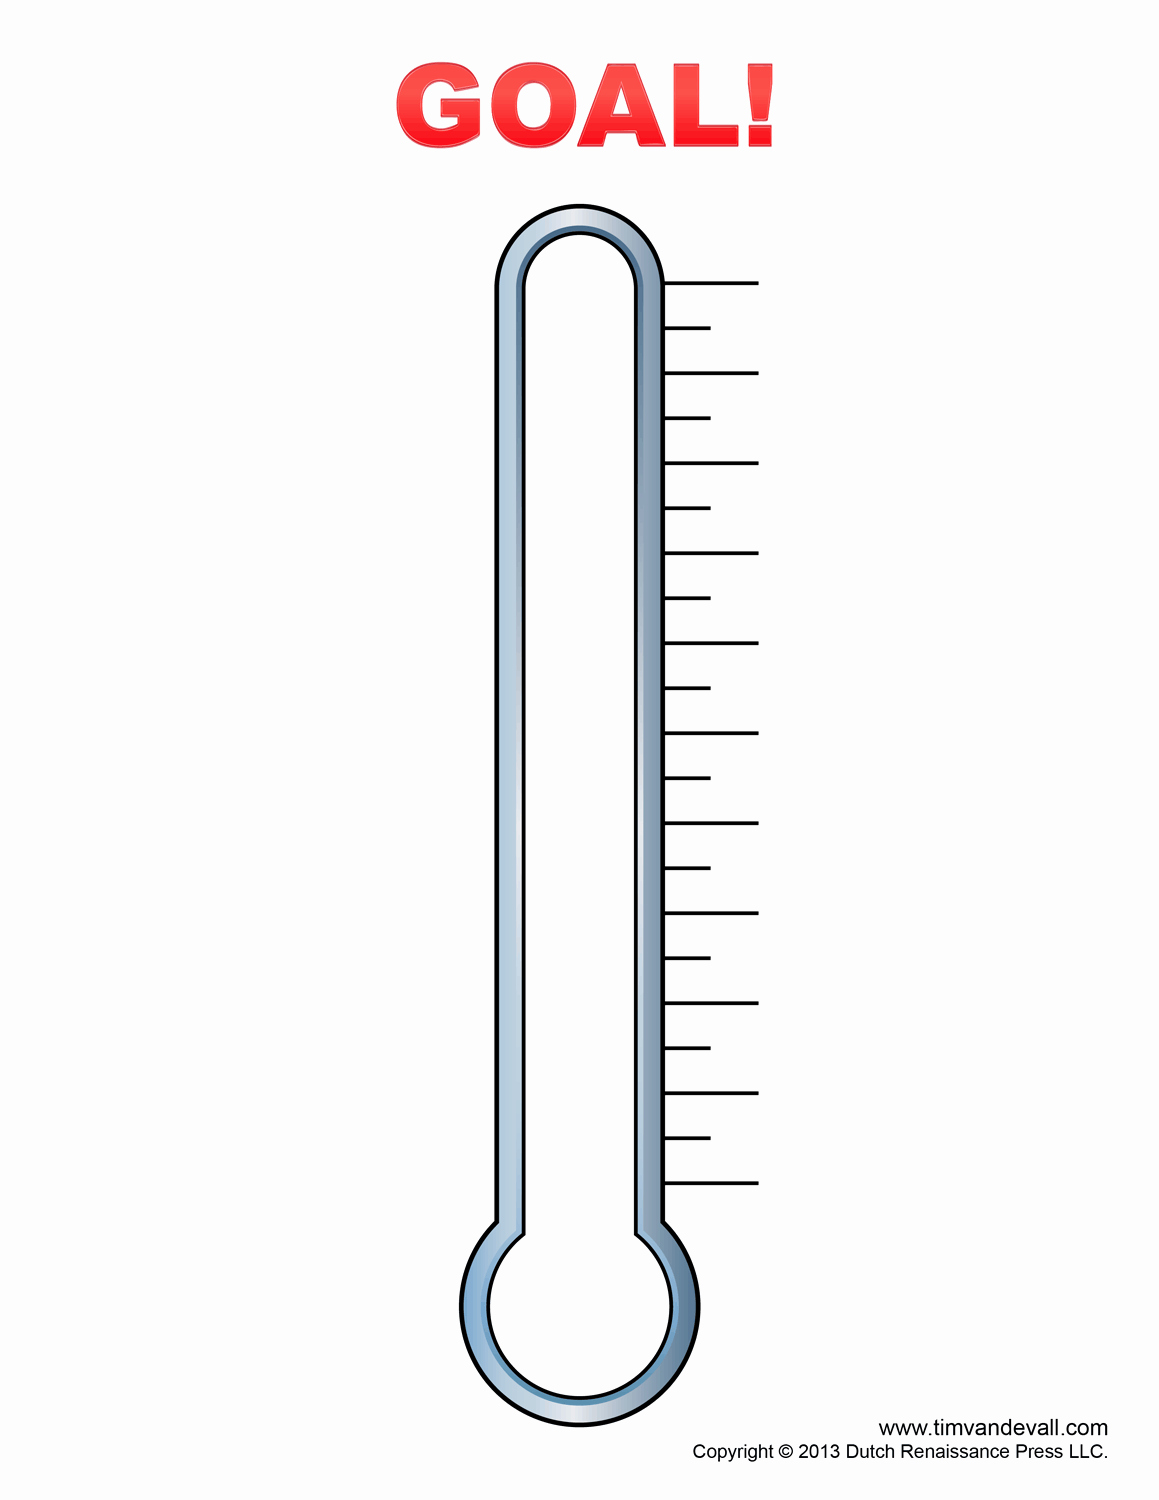 Goal thermometer Template Excel Lovely Fundraising thermometer Template for J